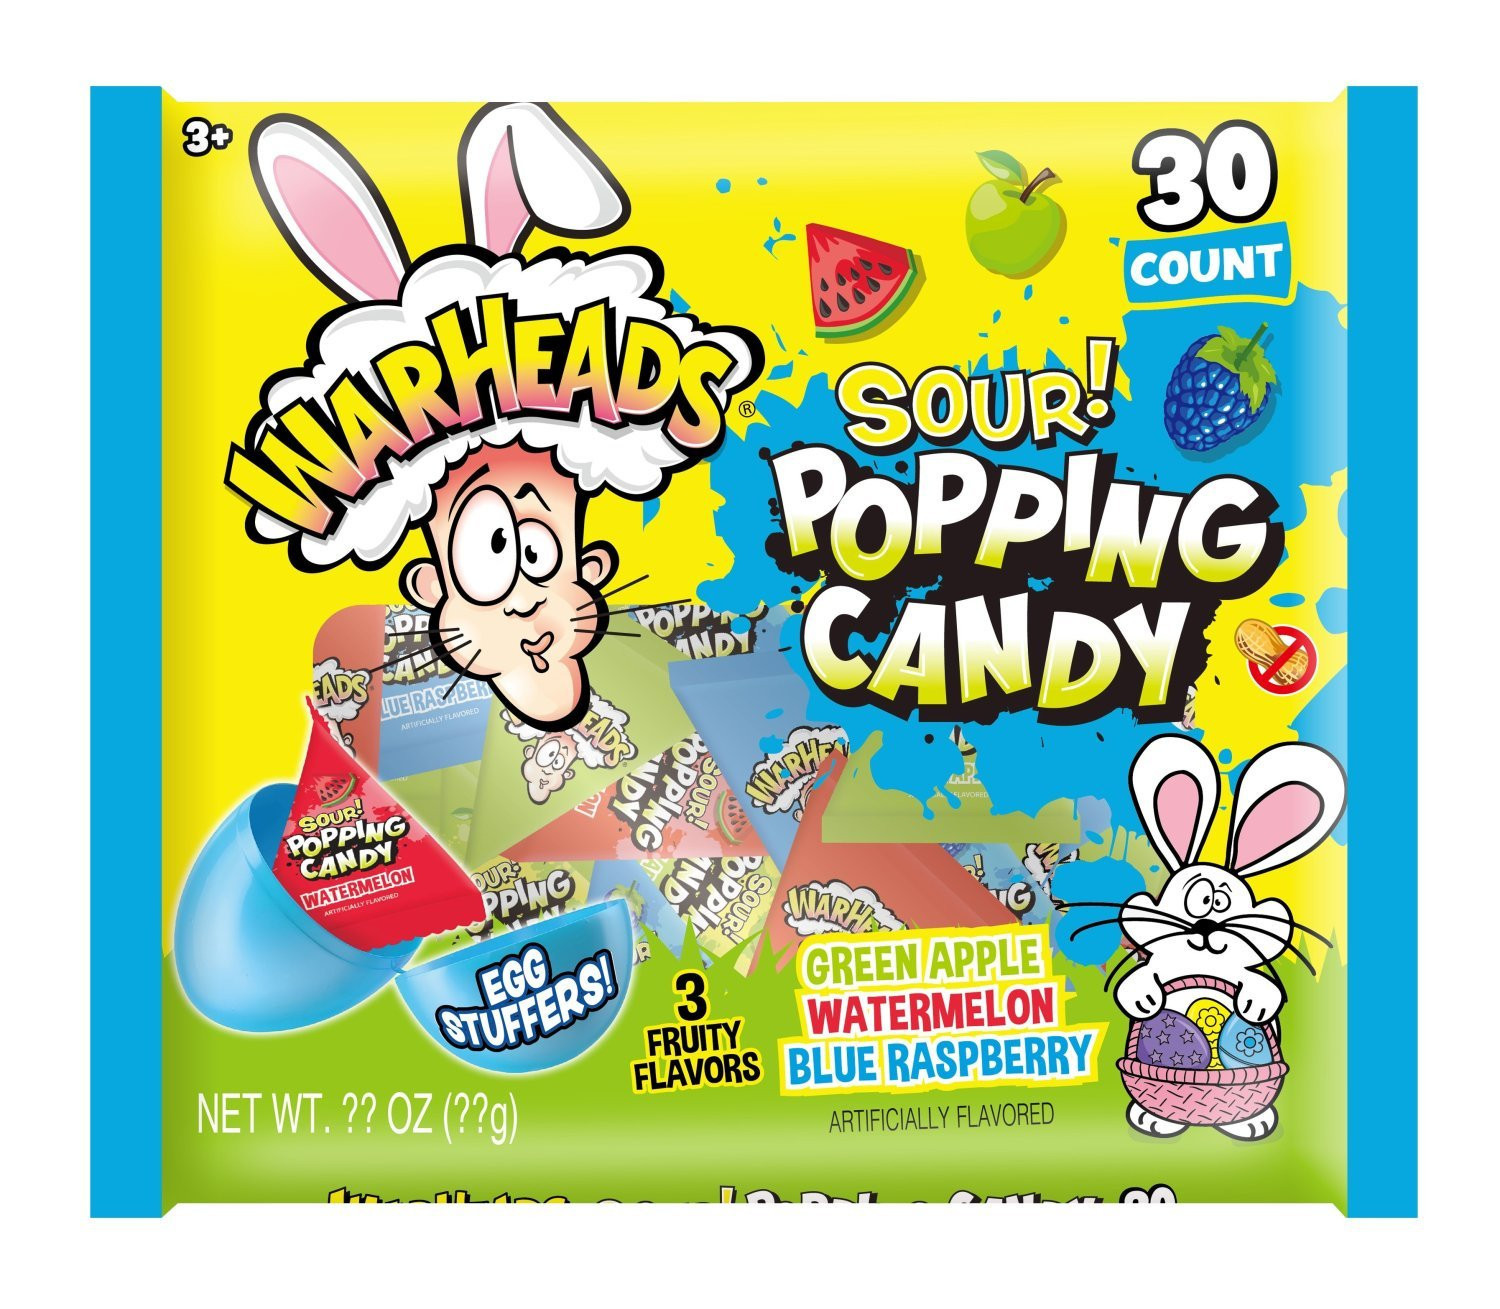 WarHeads WarHeads Easter SOUR 30ct. Popping Candy Laydown Bag 3.17oz.